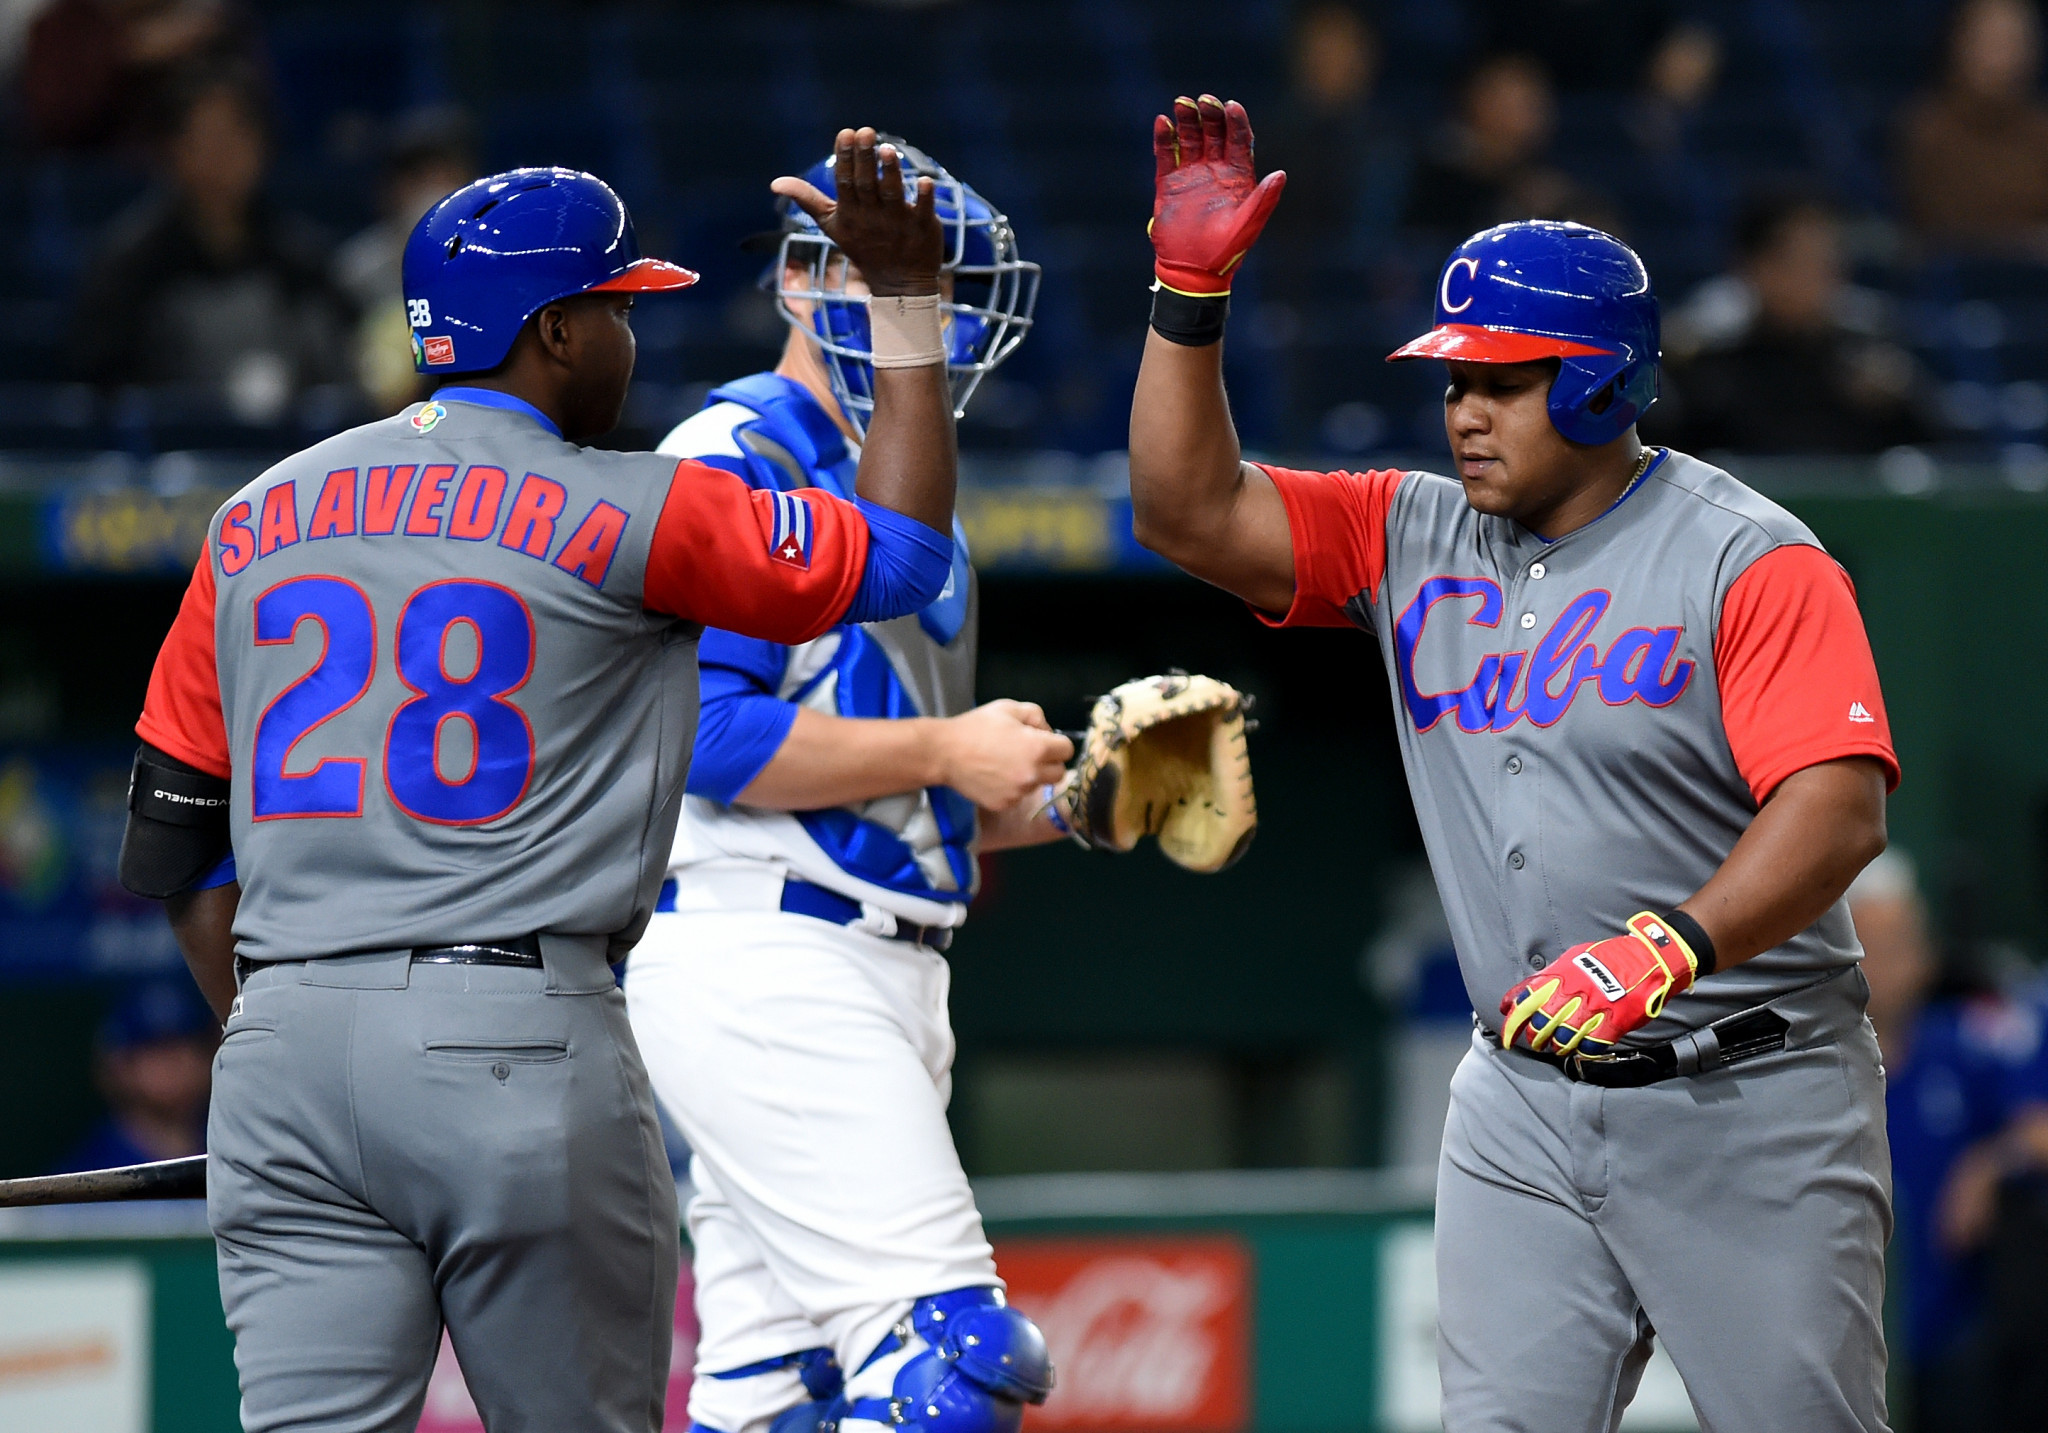 Cuban baseball players will now be able to sign for Major League Baseball teams without having to establish residency in another country ©Getty Images